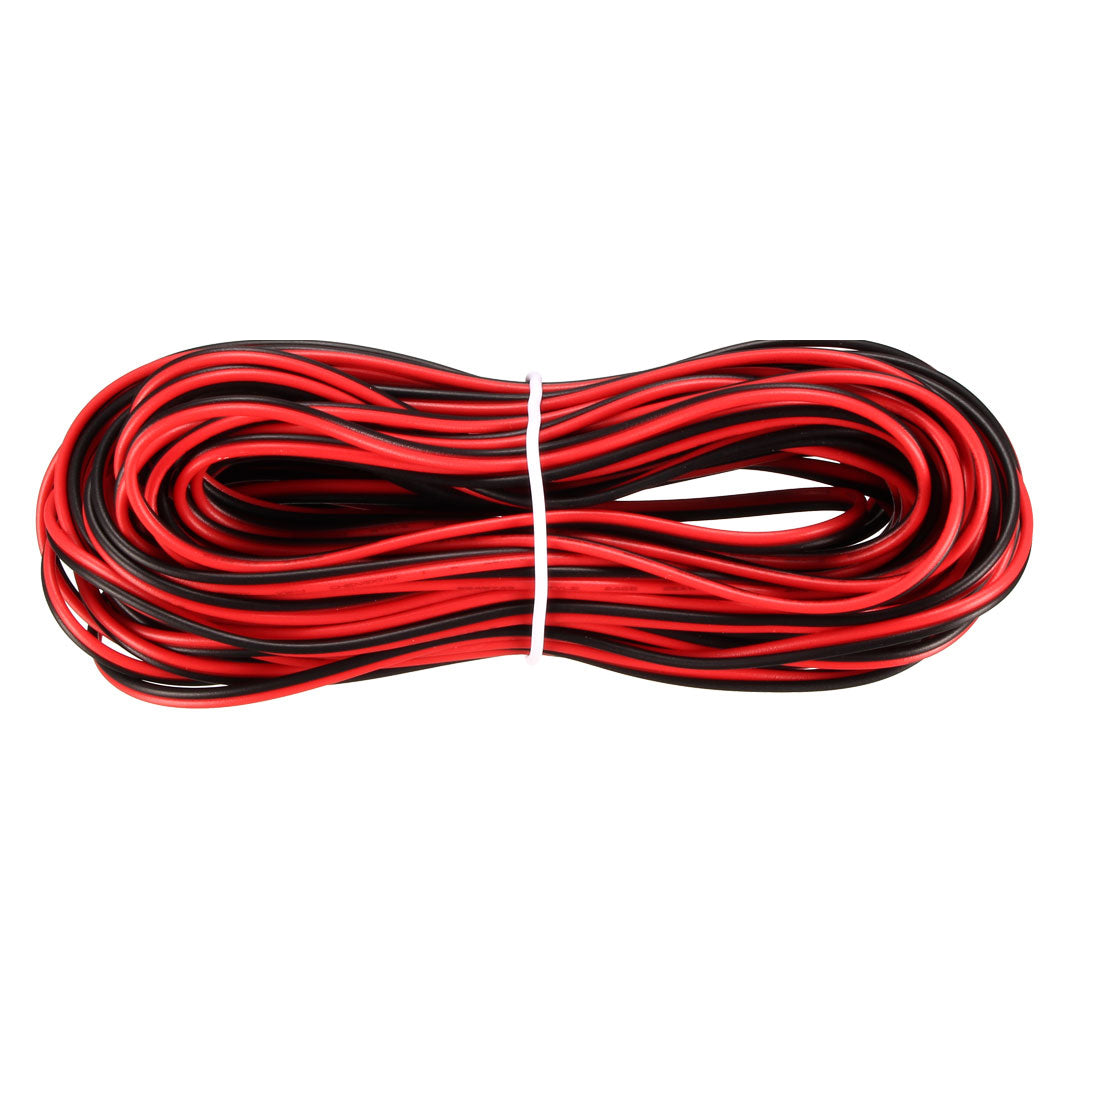 uxcell Uxcell Red Black Wire 2pin Extension Cable Cord 26 AWG Parallel Wire Tin Plated Copper 10M Length for LED Strip Light